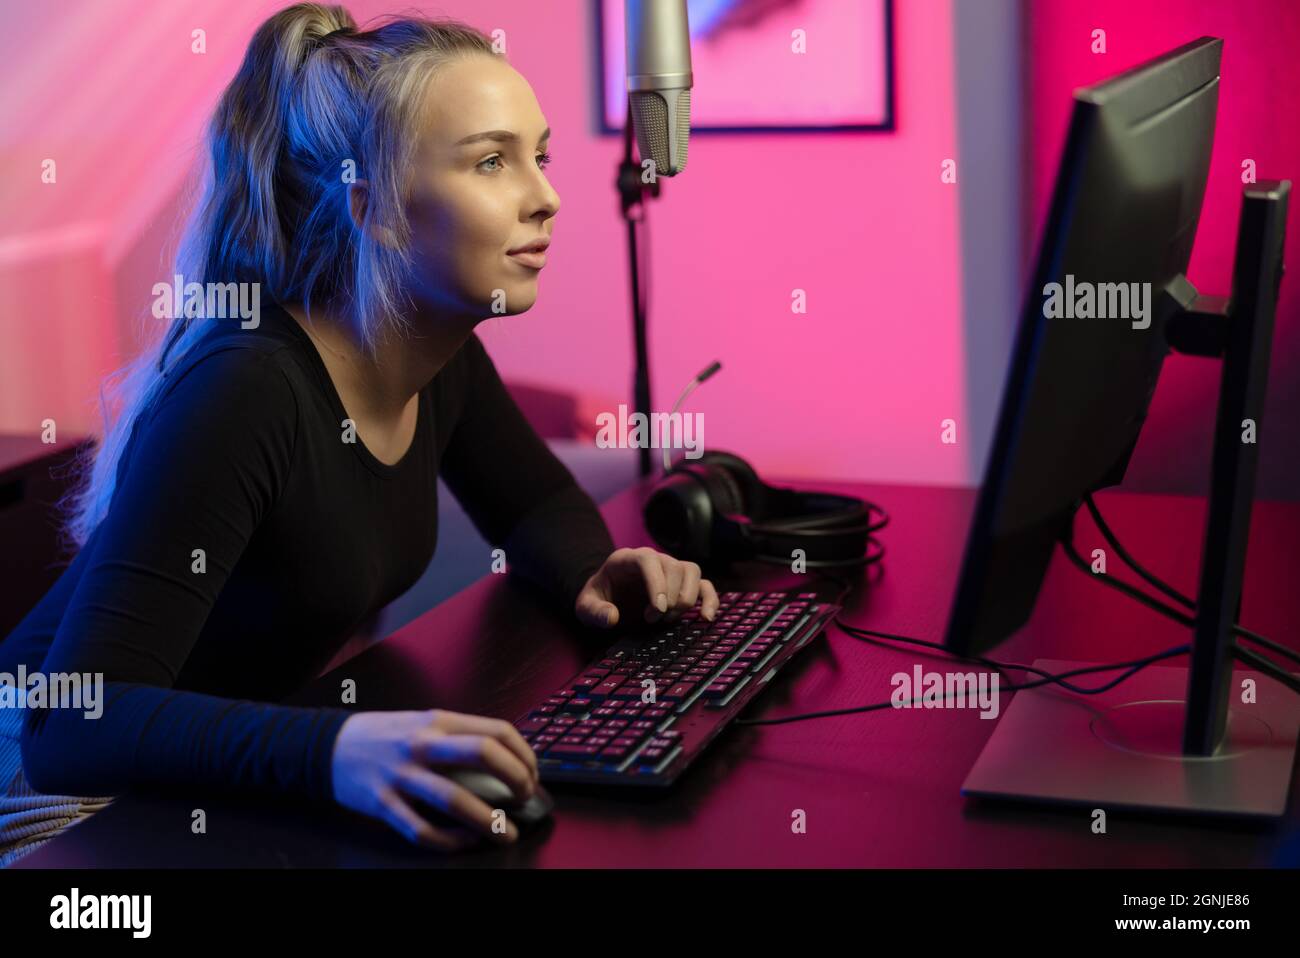 Focused and Beautiful Blonde E-sport Gamer Girl with Headset Playing Online  Video Game on PC Stock Photo - Alamy